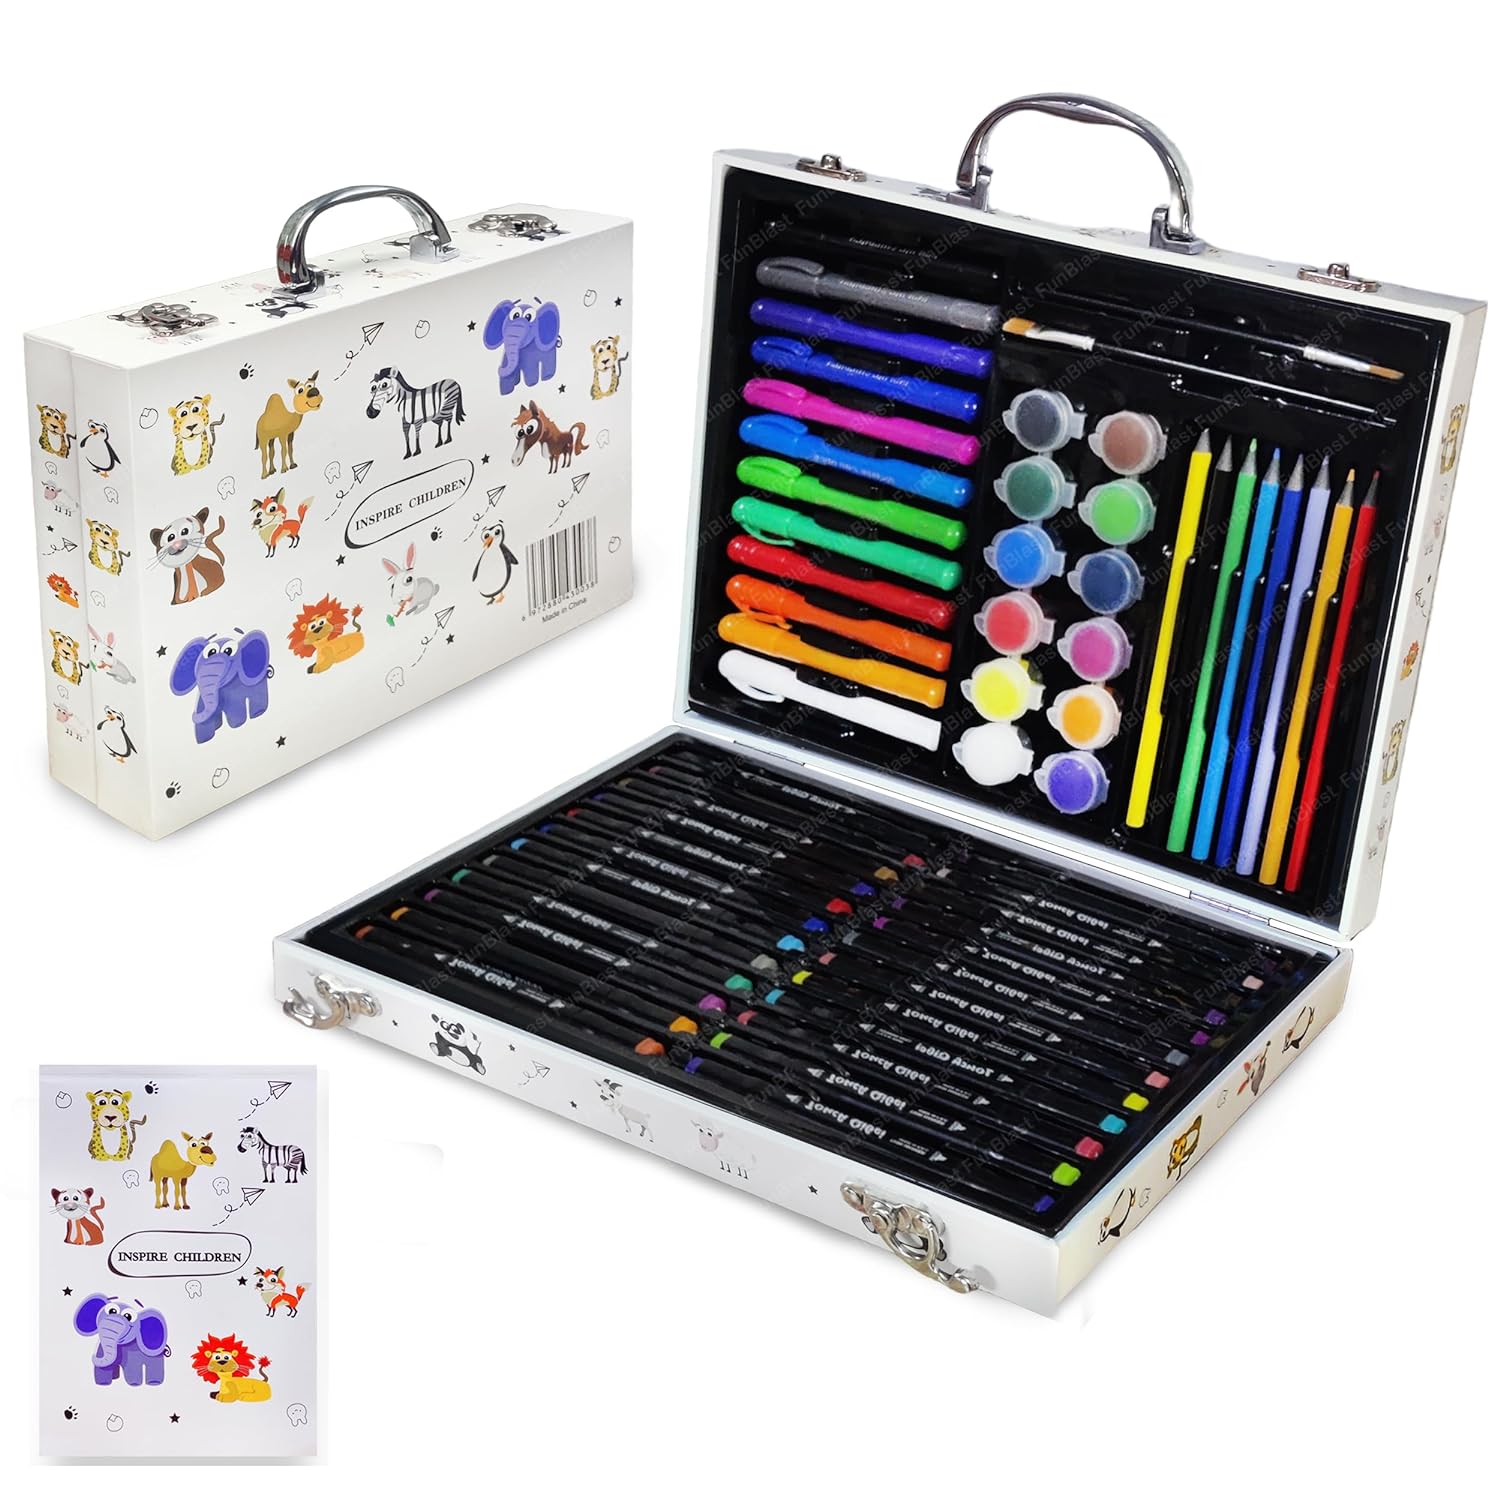 Color Box with Multiple Coloring Kit, Twin Tip Color Markers, Colourin